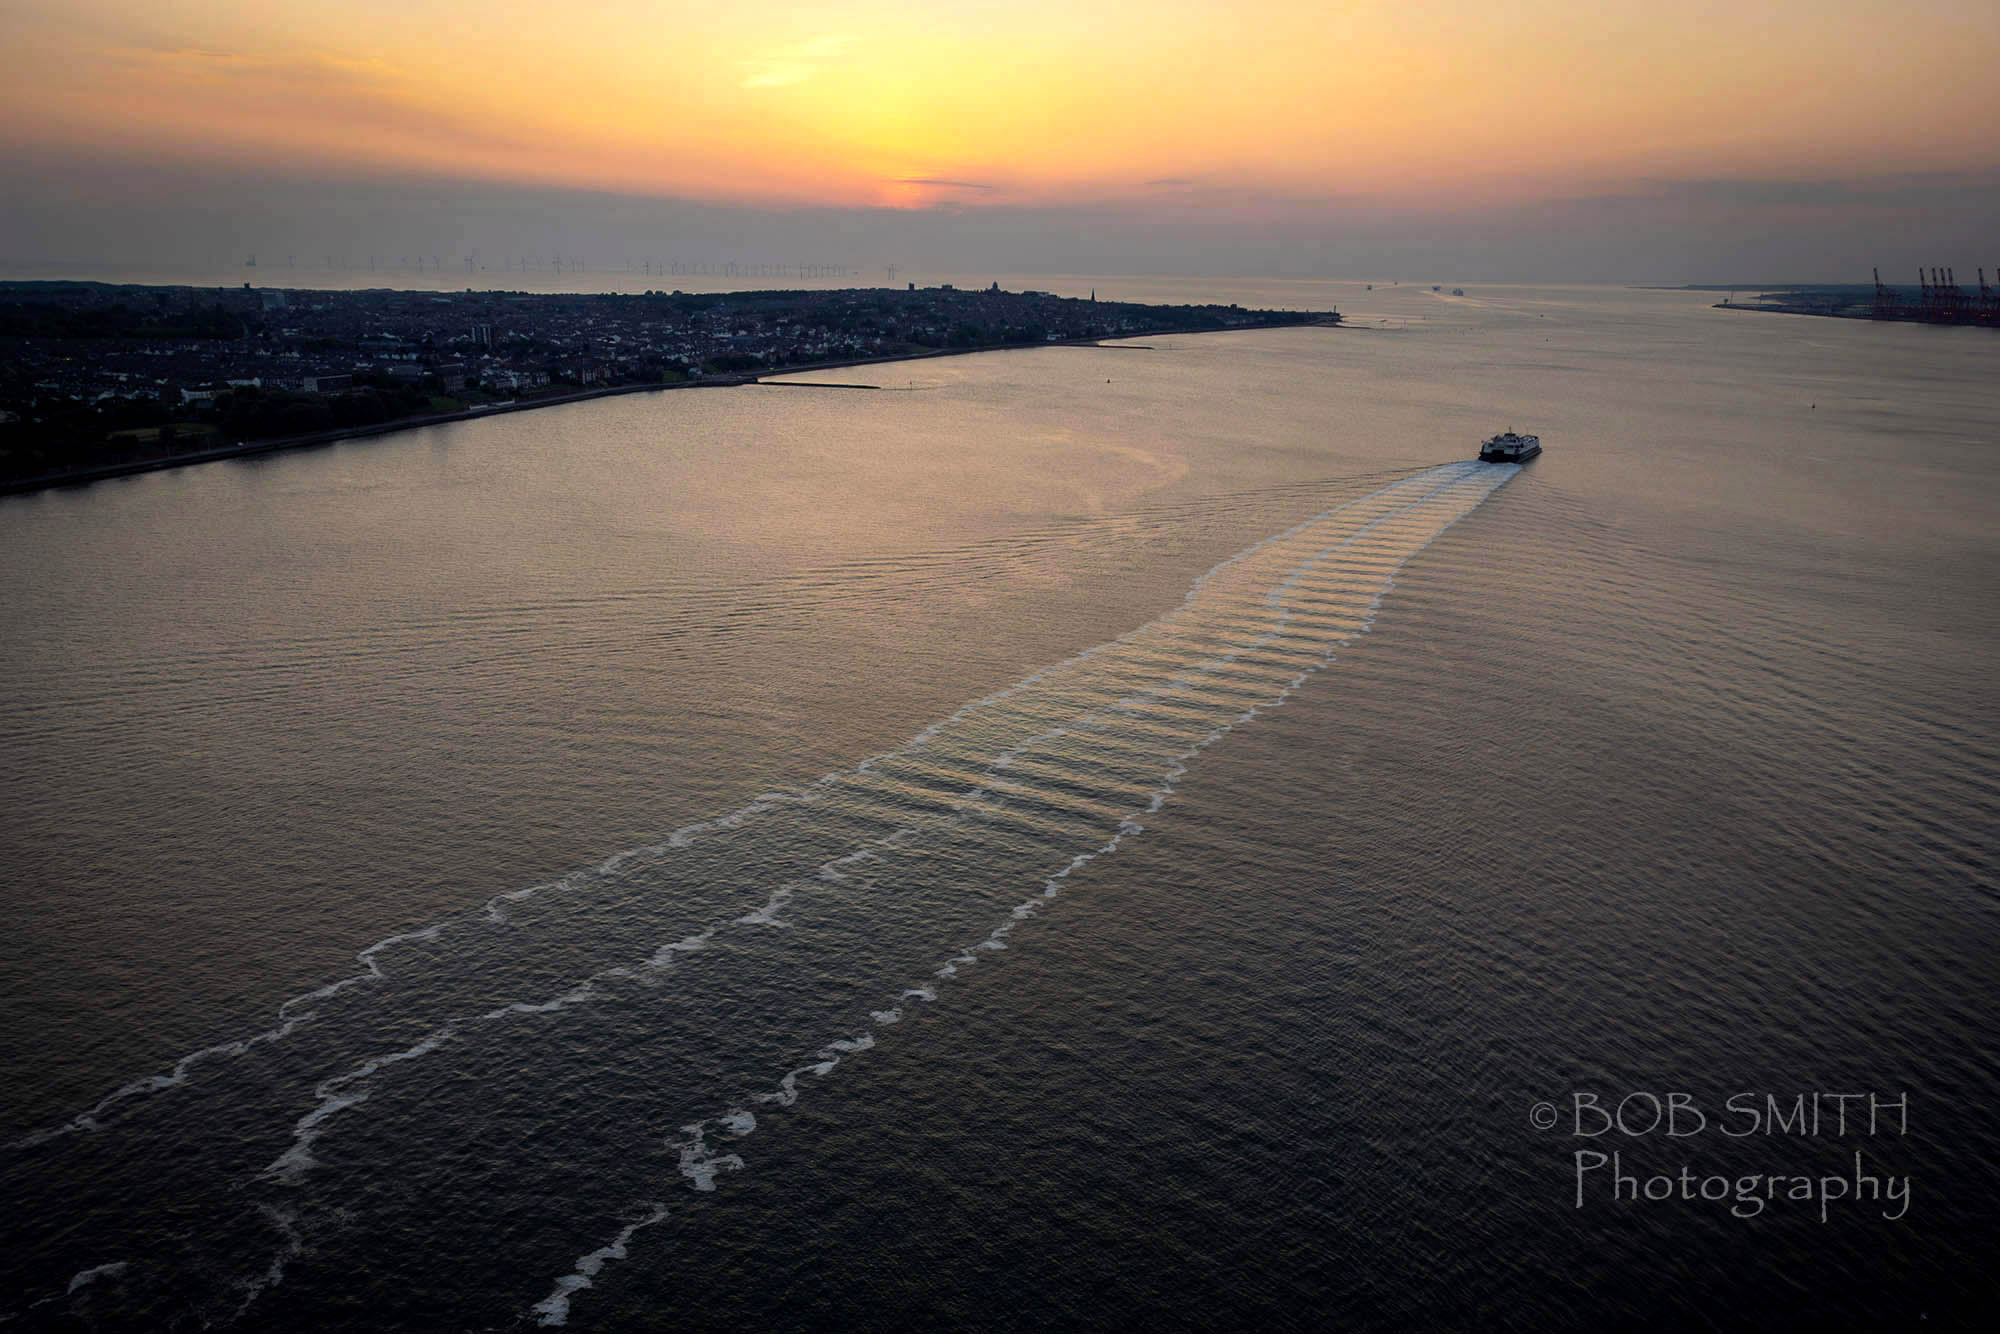 The Isle of Man Steam Packet’s catamaran Manannan departs down the Mersey on the first leg of its journey from Liverpool to Douglas in my drone shot, as the sun sets in the Irish Sea